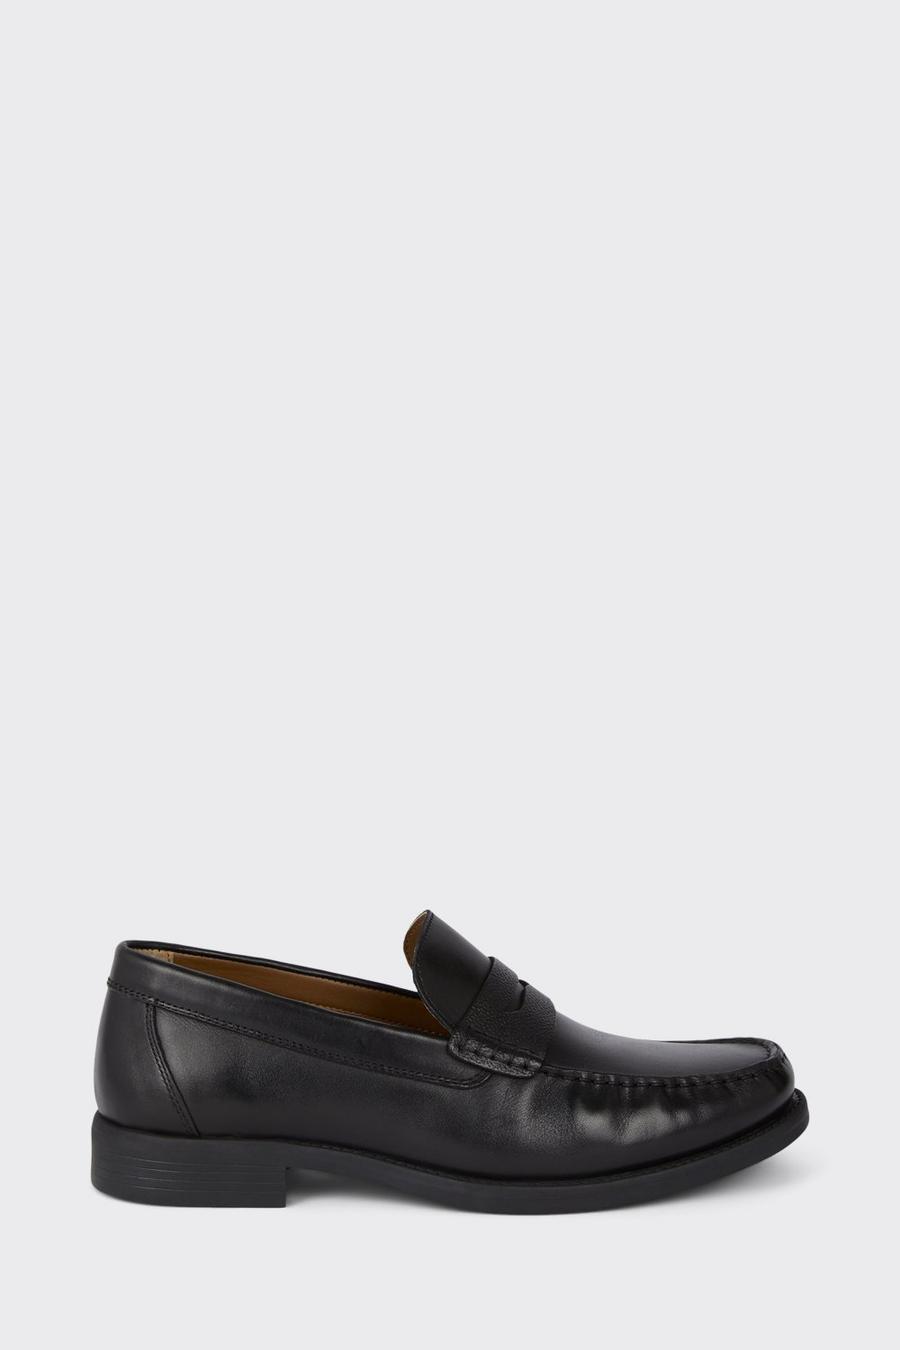 Leather Smart Textured Black Penny Loafers